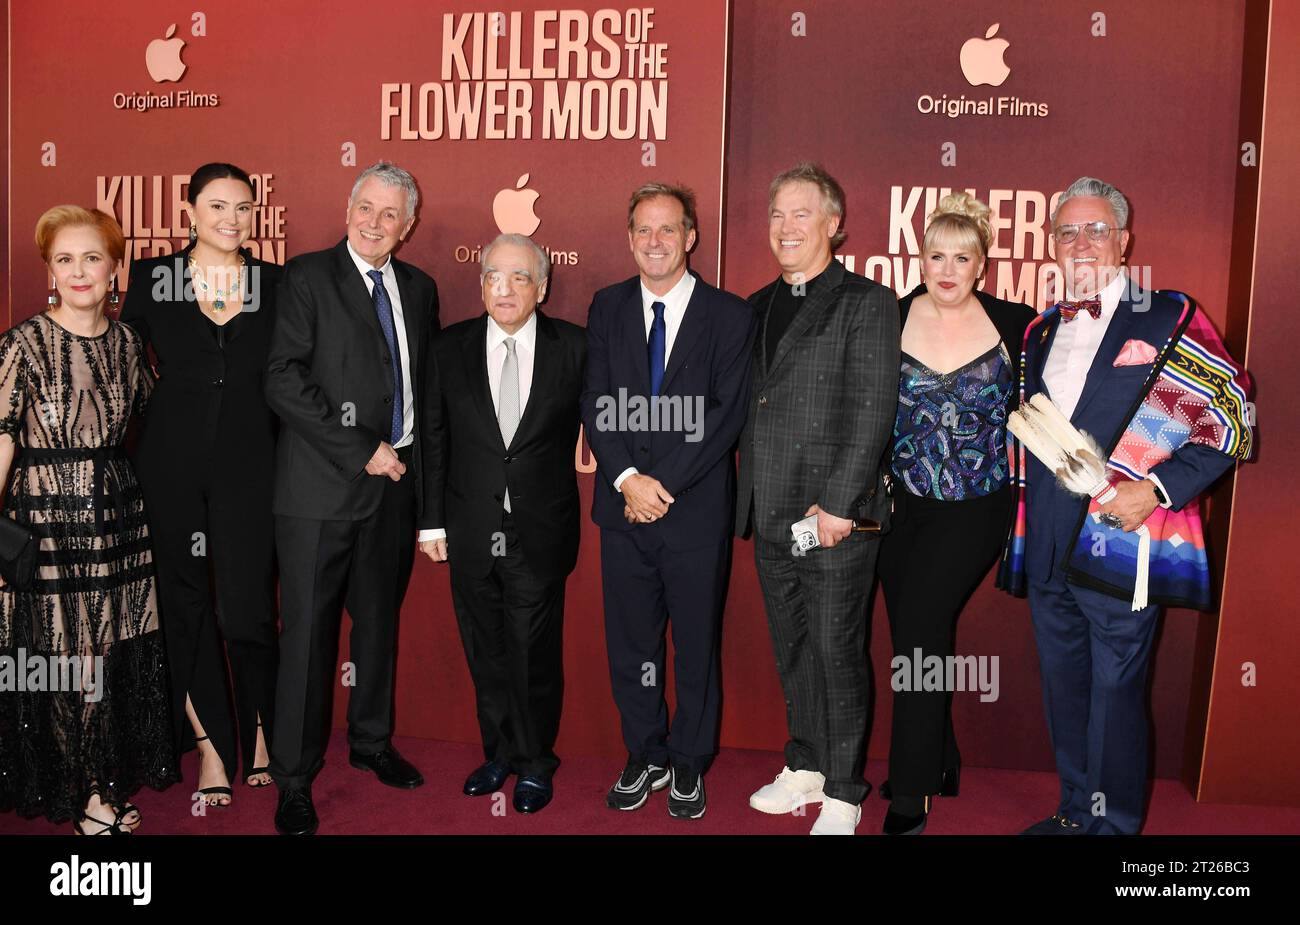 LOS ANGELES, CALIFORNIA - OCTOBER 16: L-R Marianne Bower, Justine Conte, Daniel Lupi, Martin Scorsese, Bradley Thomas, Rick Yorn and Lisa Frechette attend the Los Angeles Premiere of Apple TV s Killer Of The Flower Moon at the Dolby Theatre on October 16, 2023 in Los Angeles, California. Copyright: xJeffreyxMayerx Stock Photo